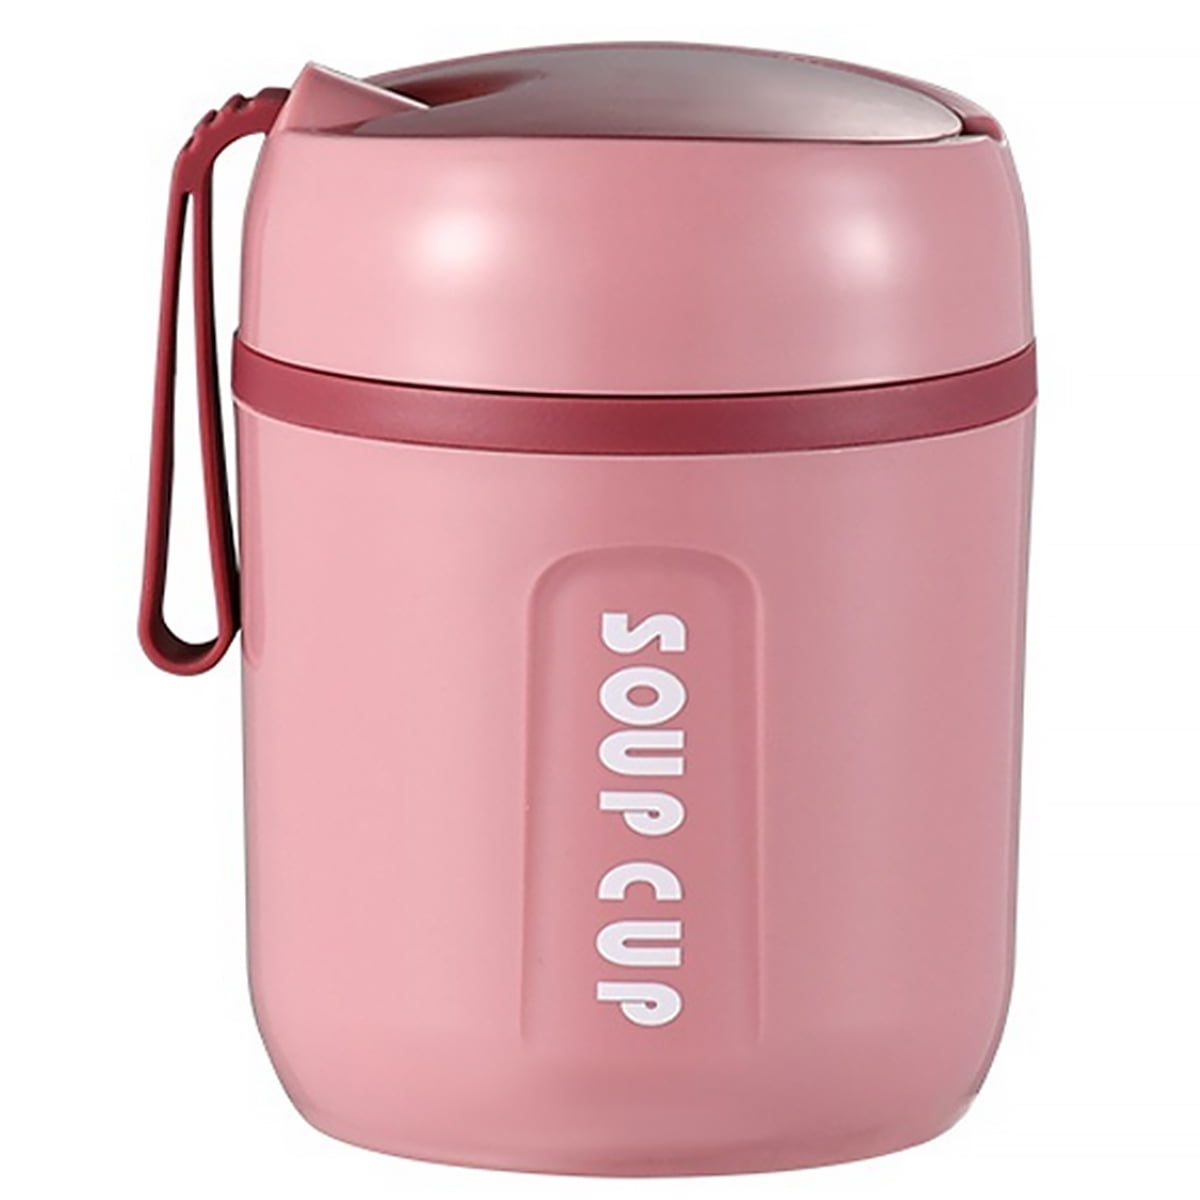 Brrnoo Stainless Steel Thermal Lunch Box, Stackable Hot Food Insulated Box  Round Sealed Food Containers Pink 